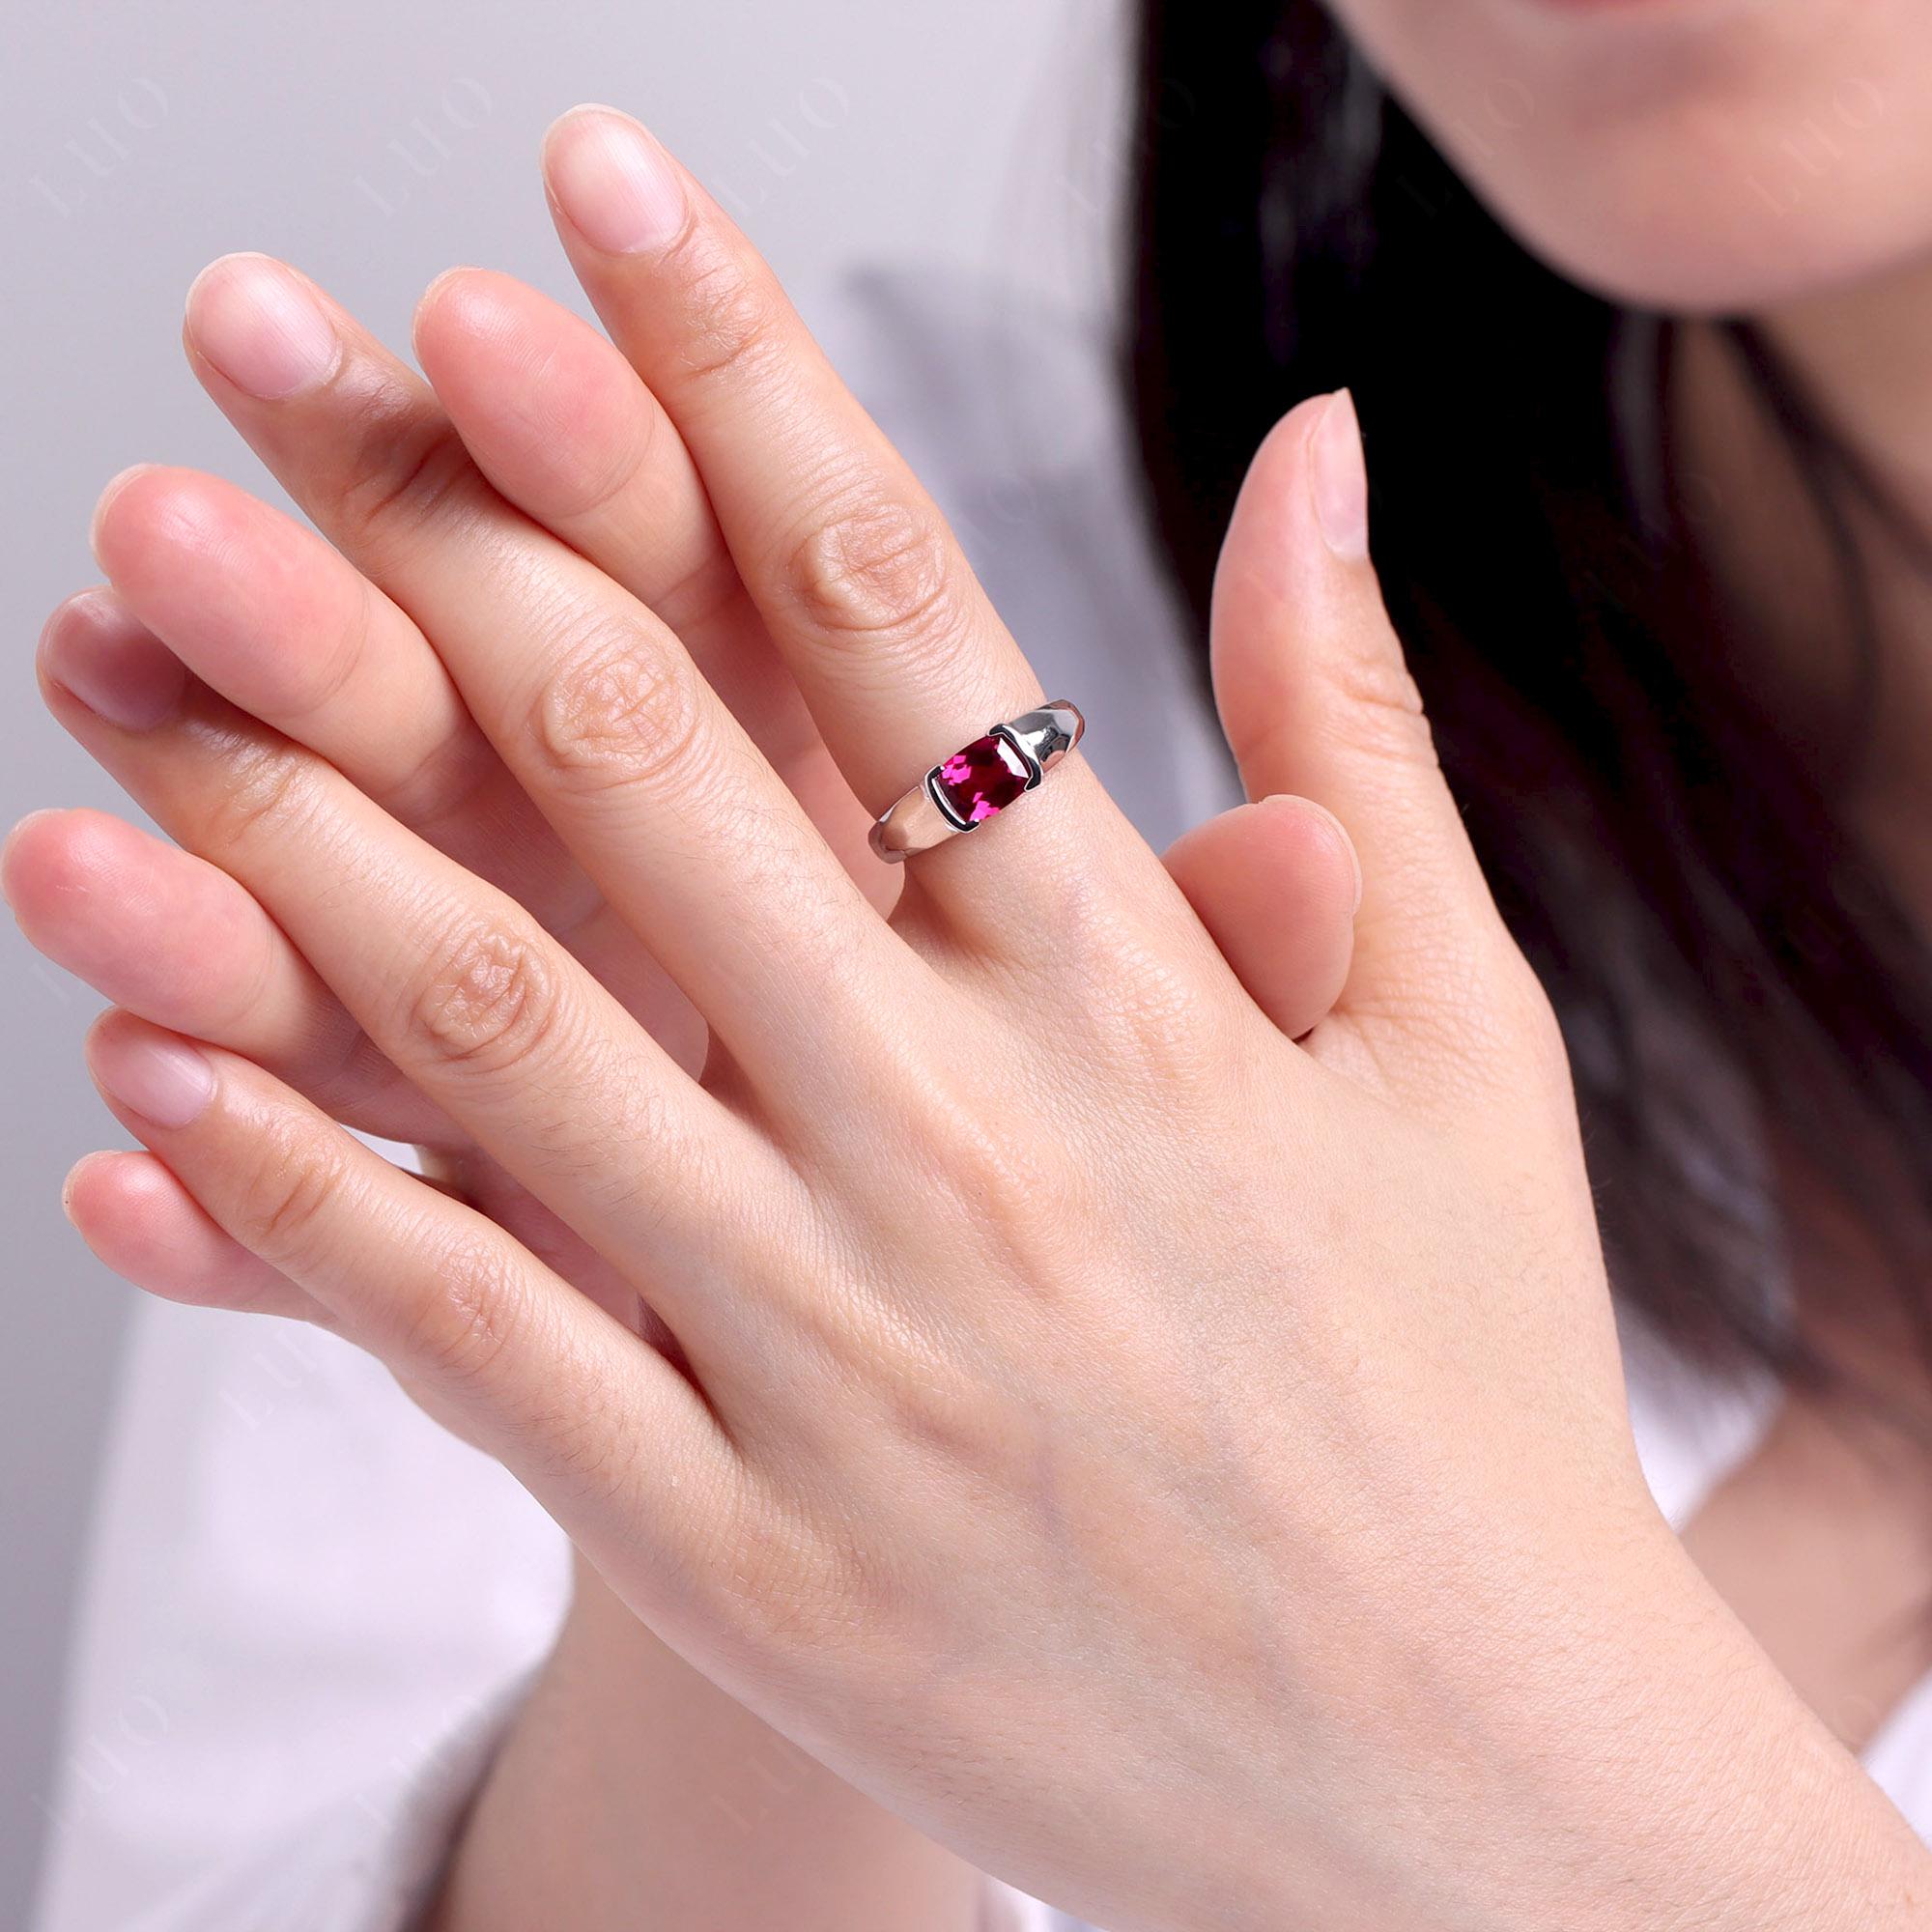 Elongated Cushion Ruby Engagement Ring - LUO Jewelry